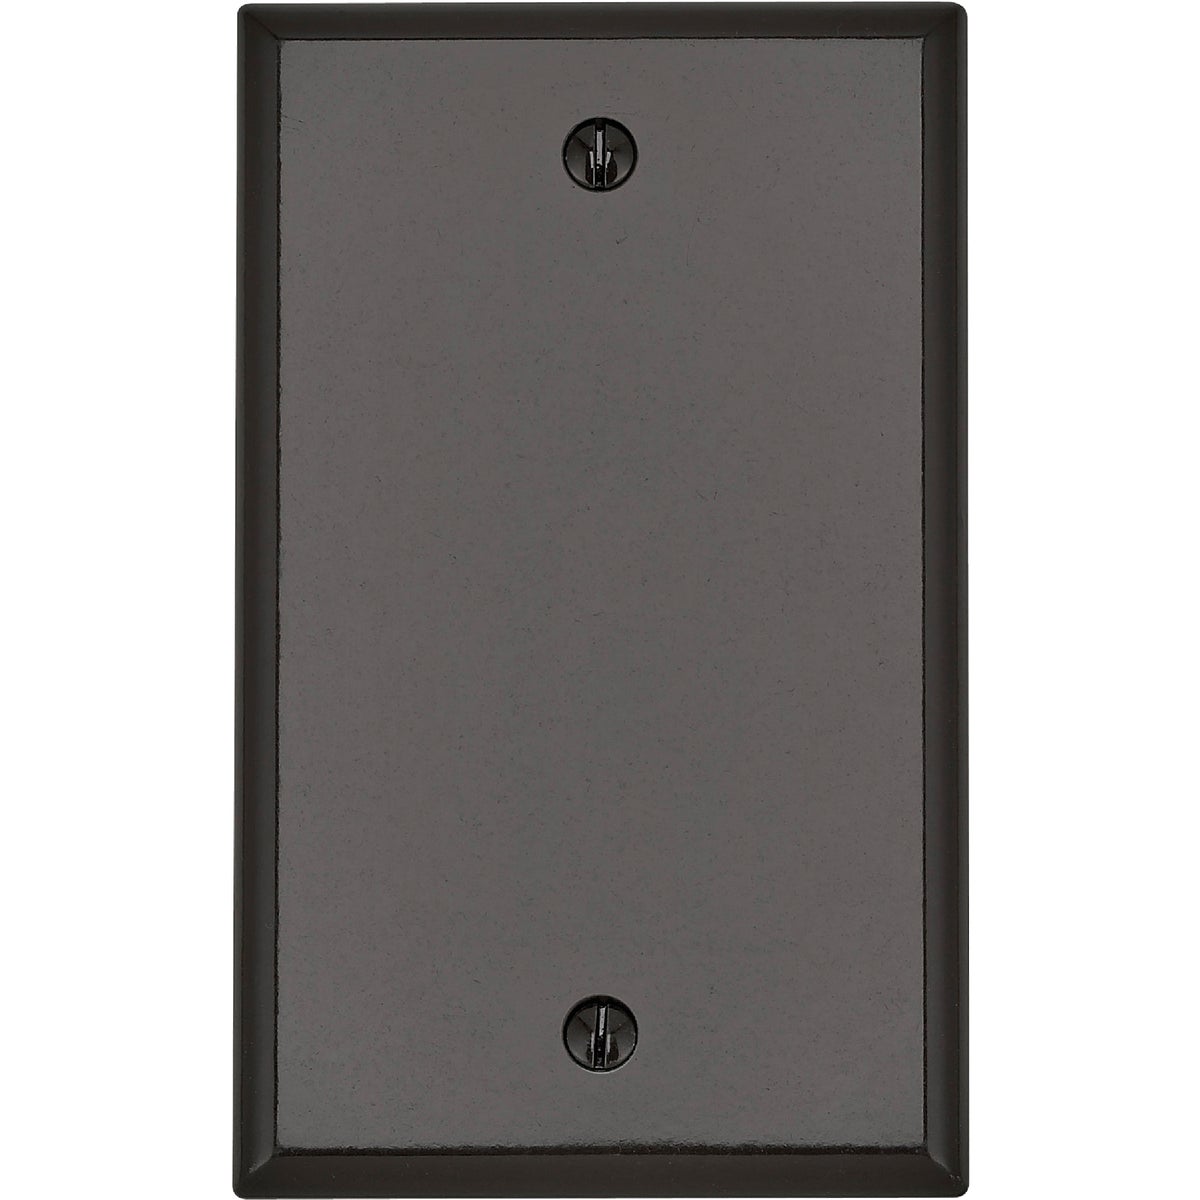 Item 514116, Traditional, thermoset blank wall plate.